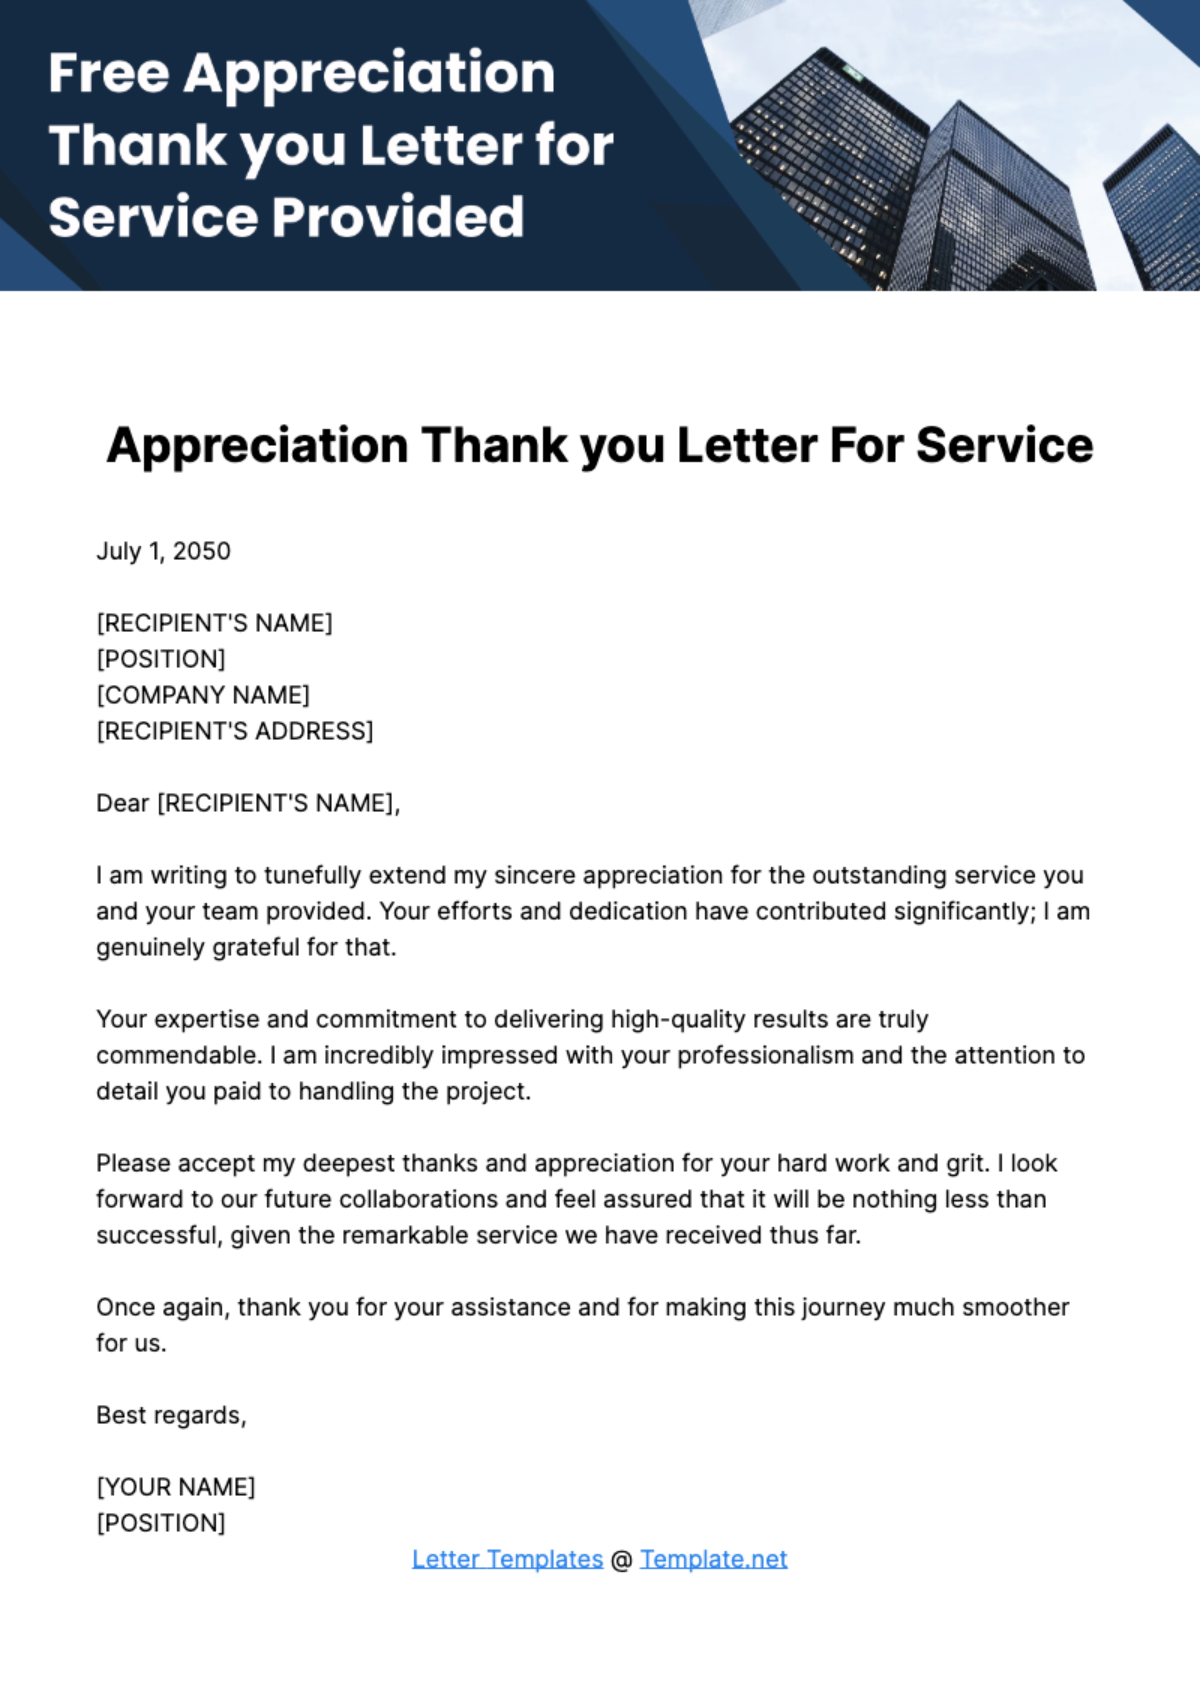 Free Appreciation Thank you Letter for Service Provided Template